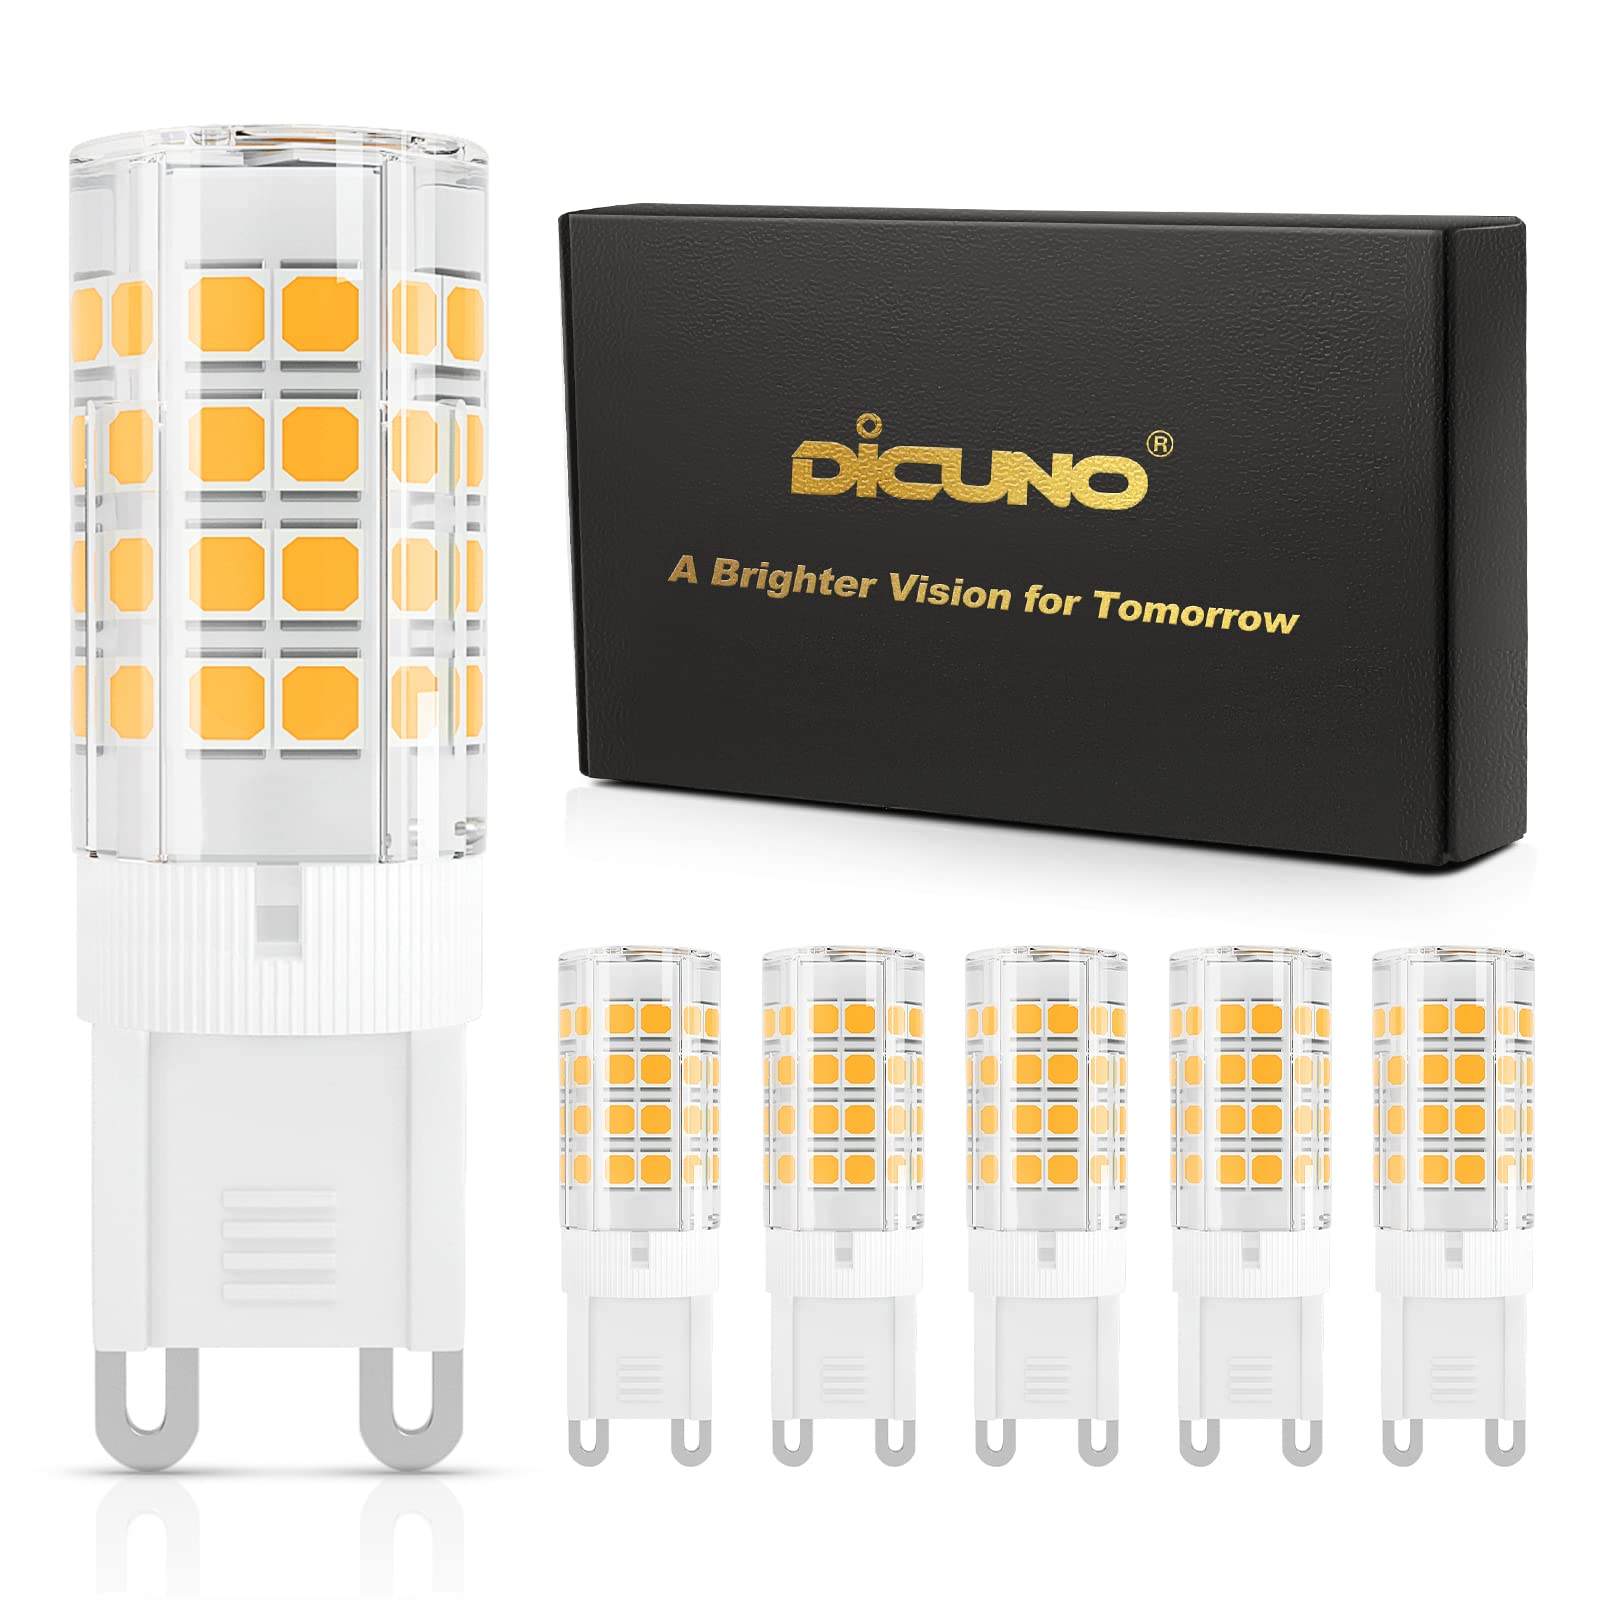 DiCUNO G9 LED Light Bulb 3W, Equivalent to 40W Halogen, Warm White 2700K, Not Dimmable, 100-240V, Energy Saving Light Bulbs 380LM, 6-Pack